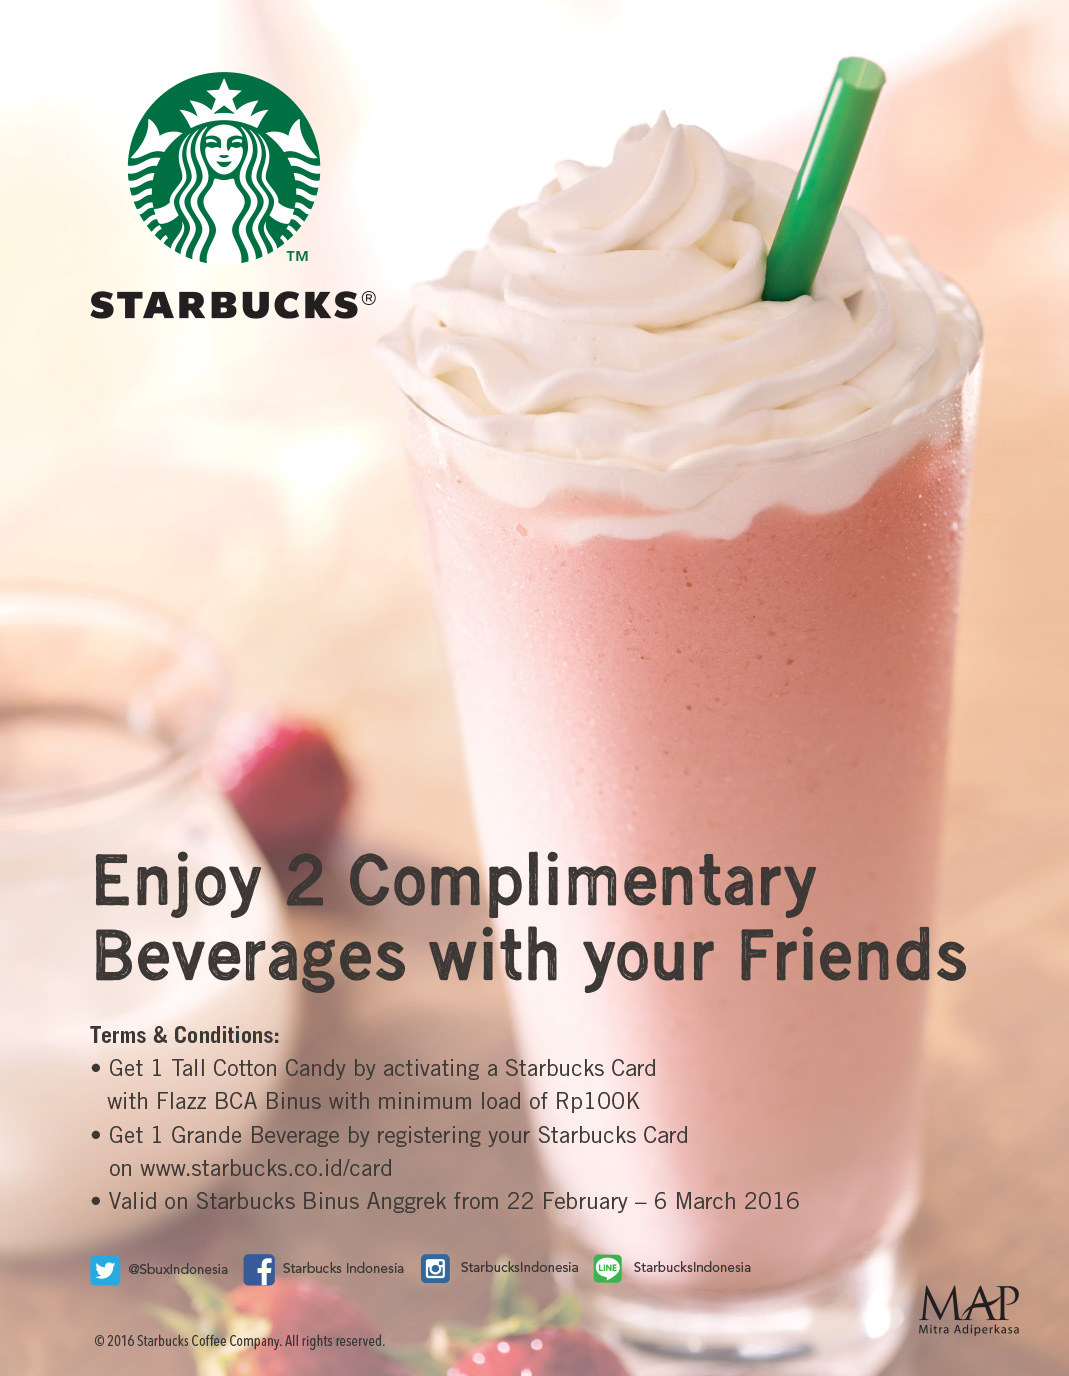 Enjoy 2 Complimentary Beverages with your Friends